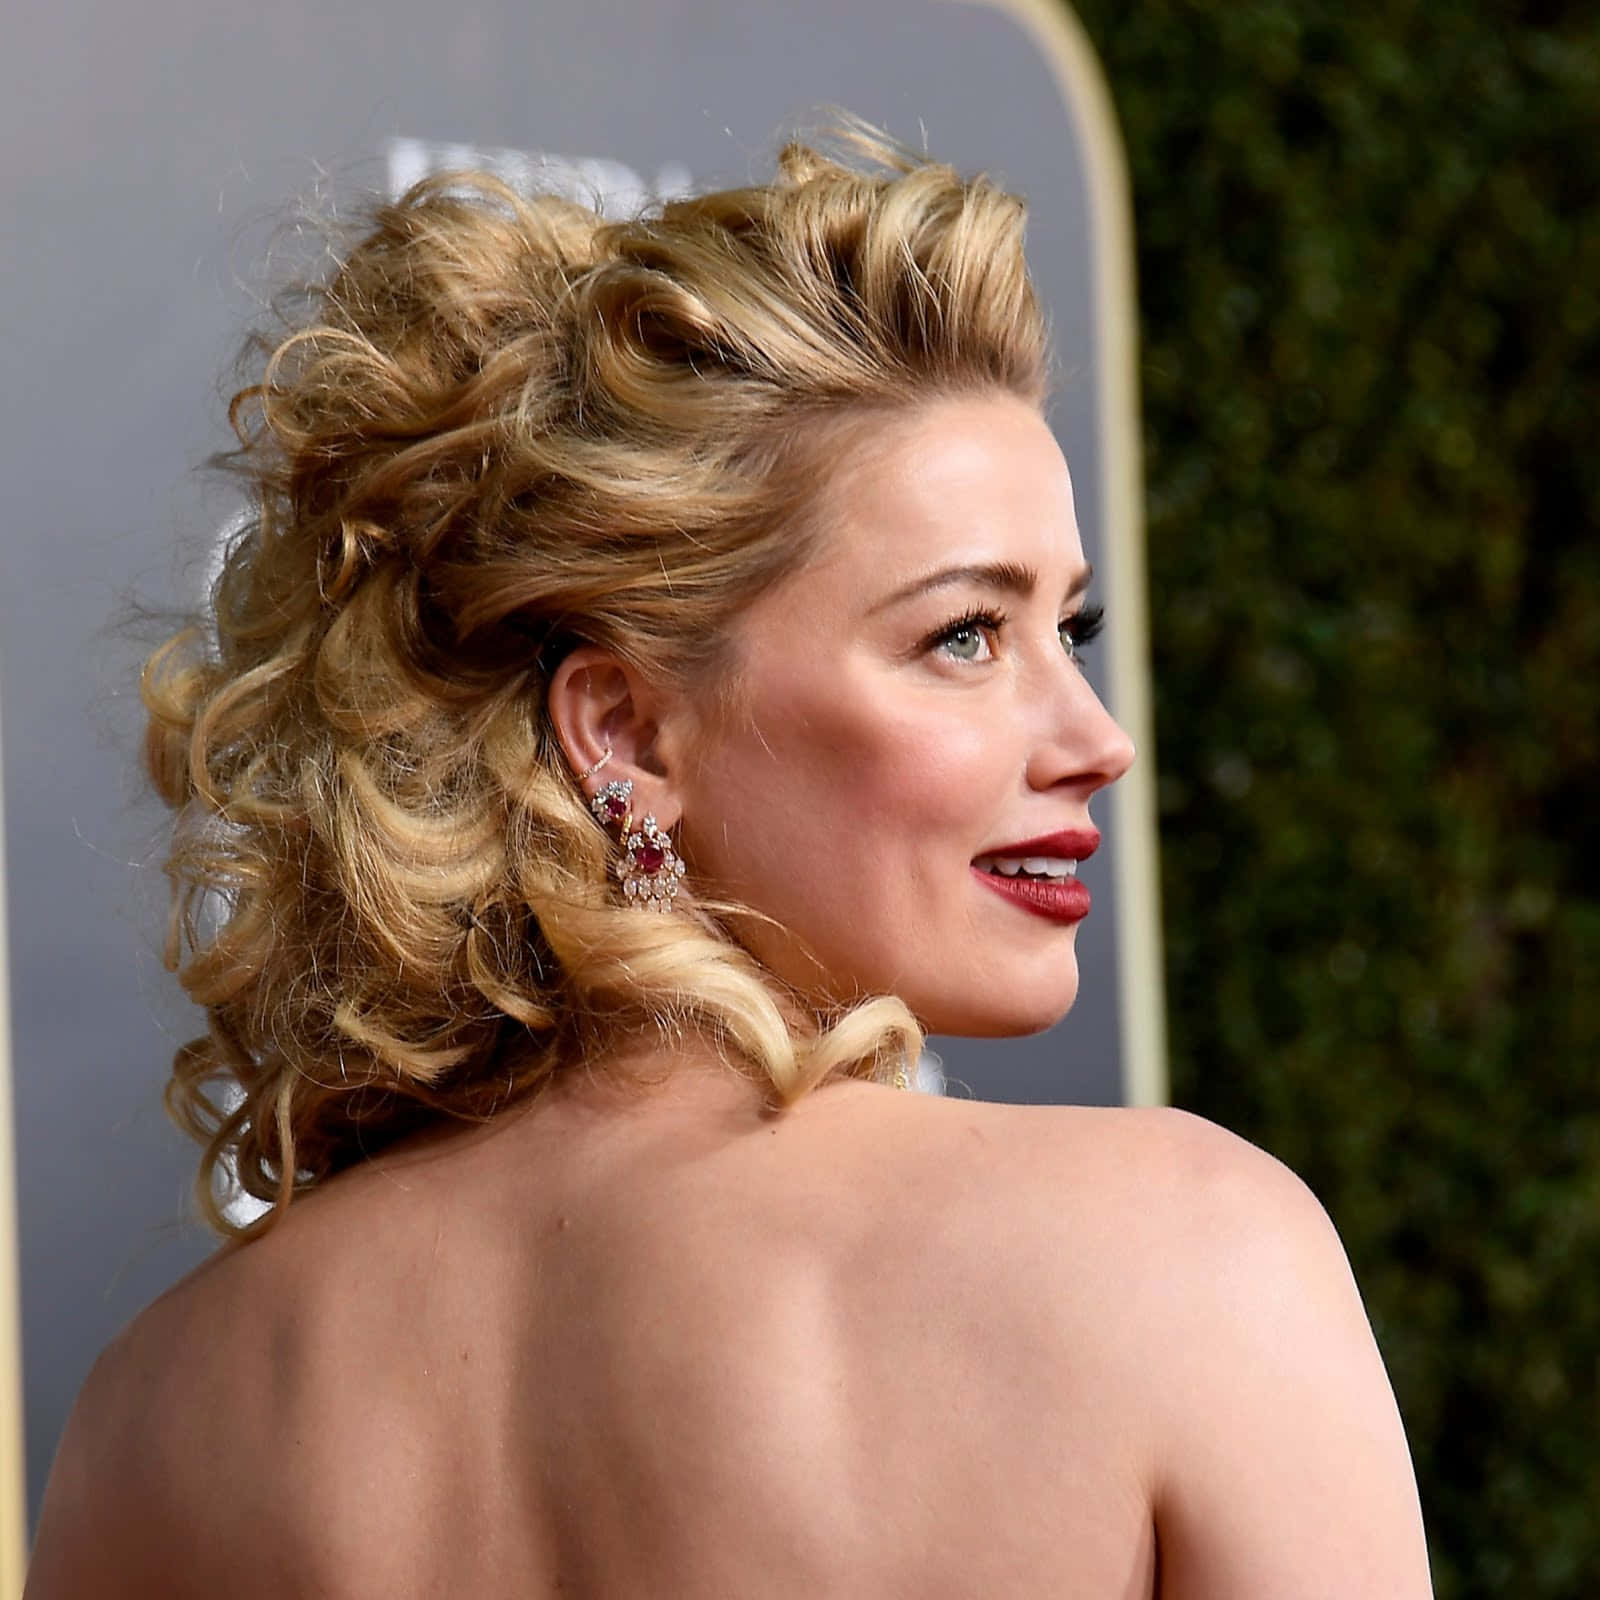 Amber Heard is a Style Icon